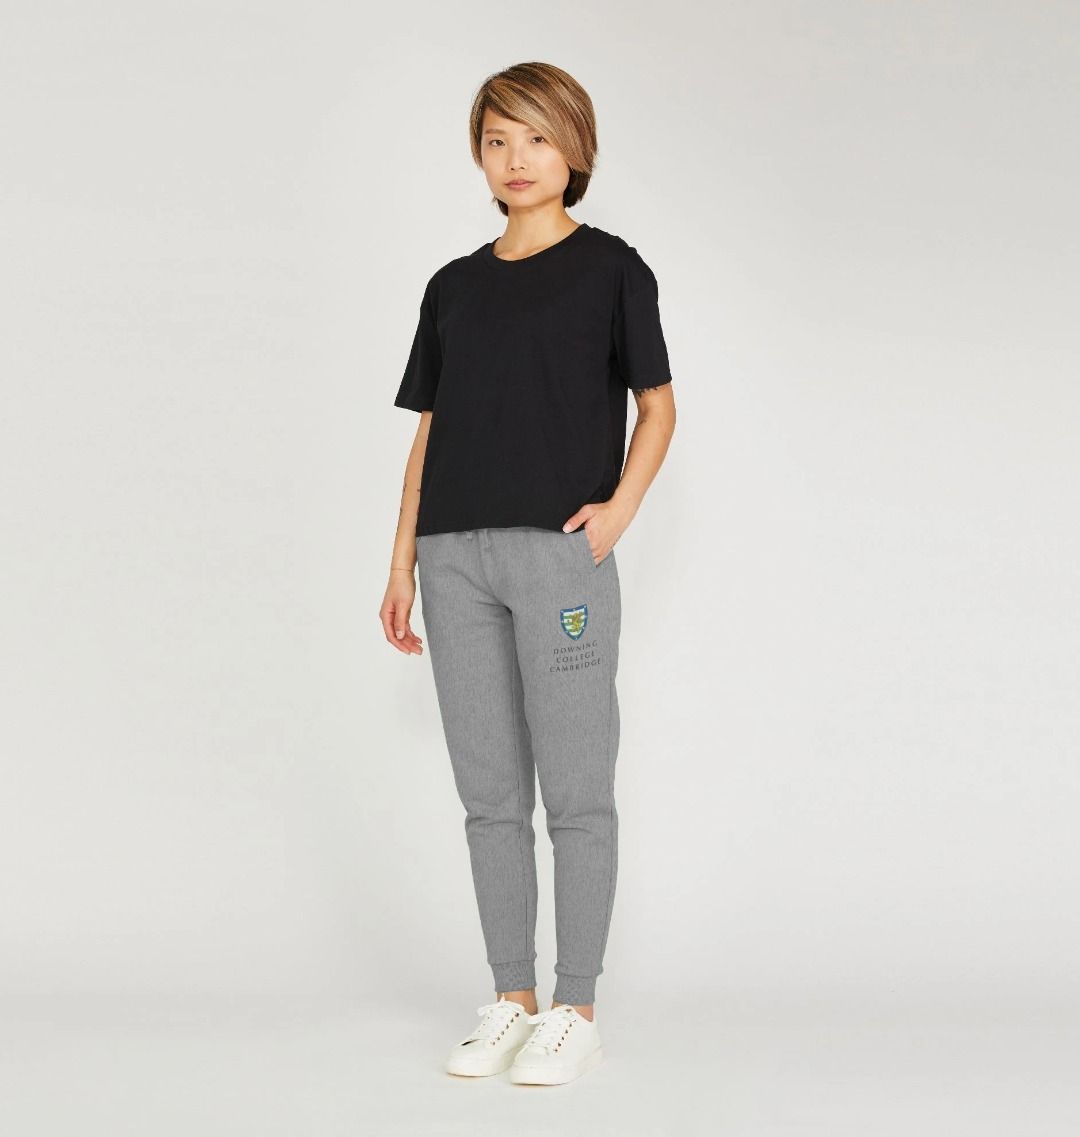 Downing College Womens Jogging Trousers